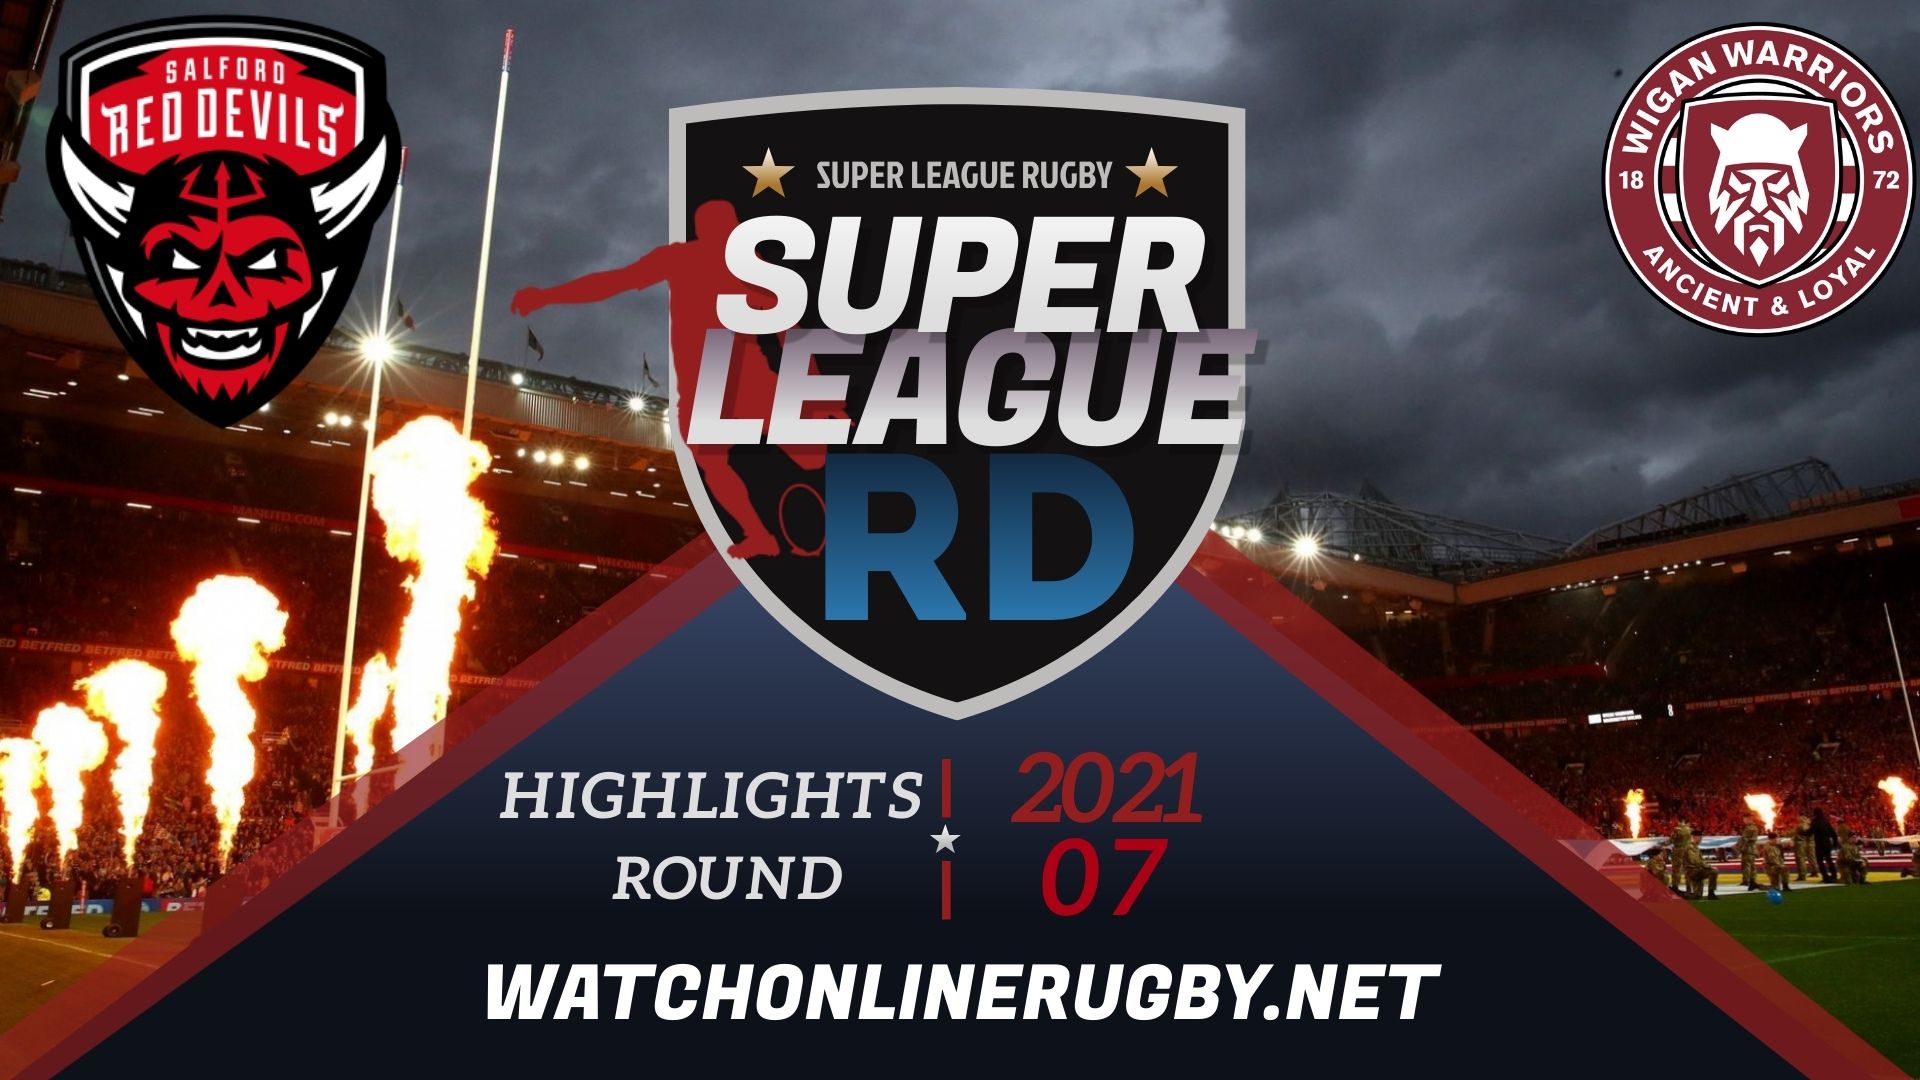 Salford Red Devils Vs Wigan Warriors Super League Rugby 2021 RD 7